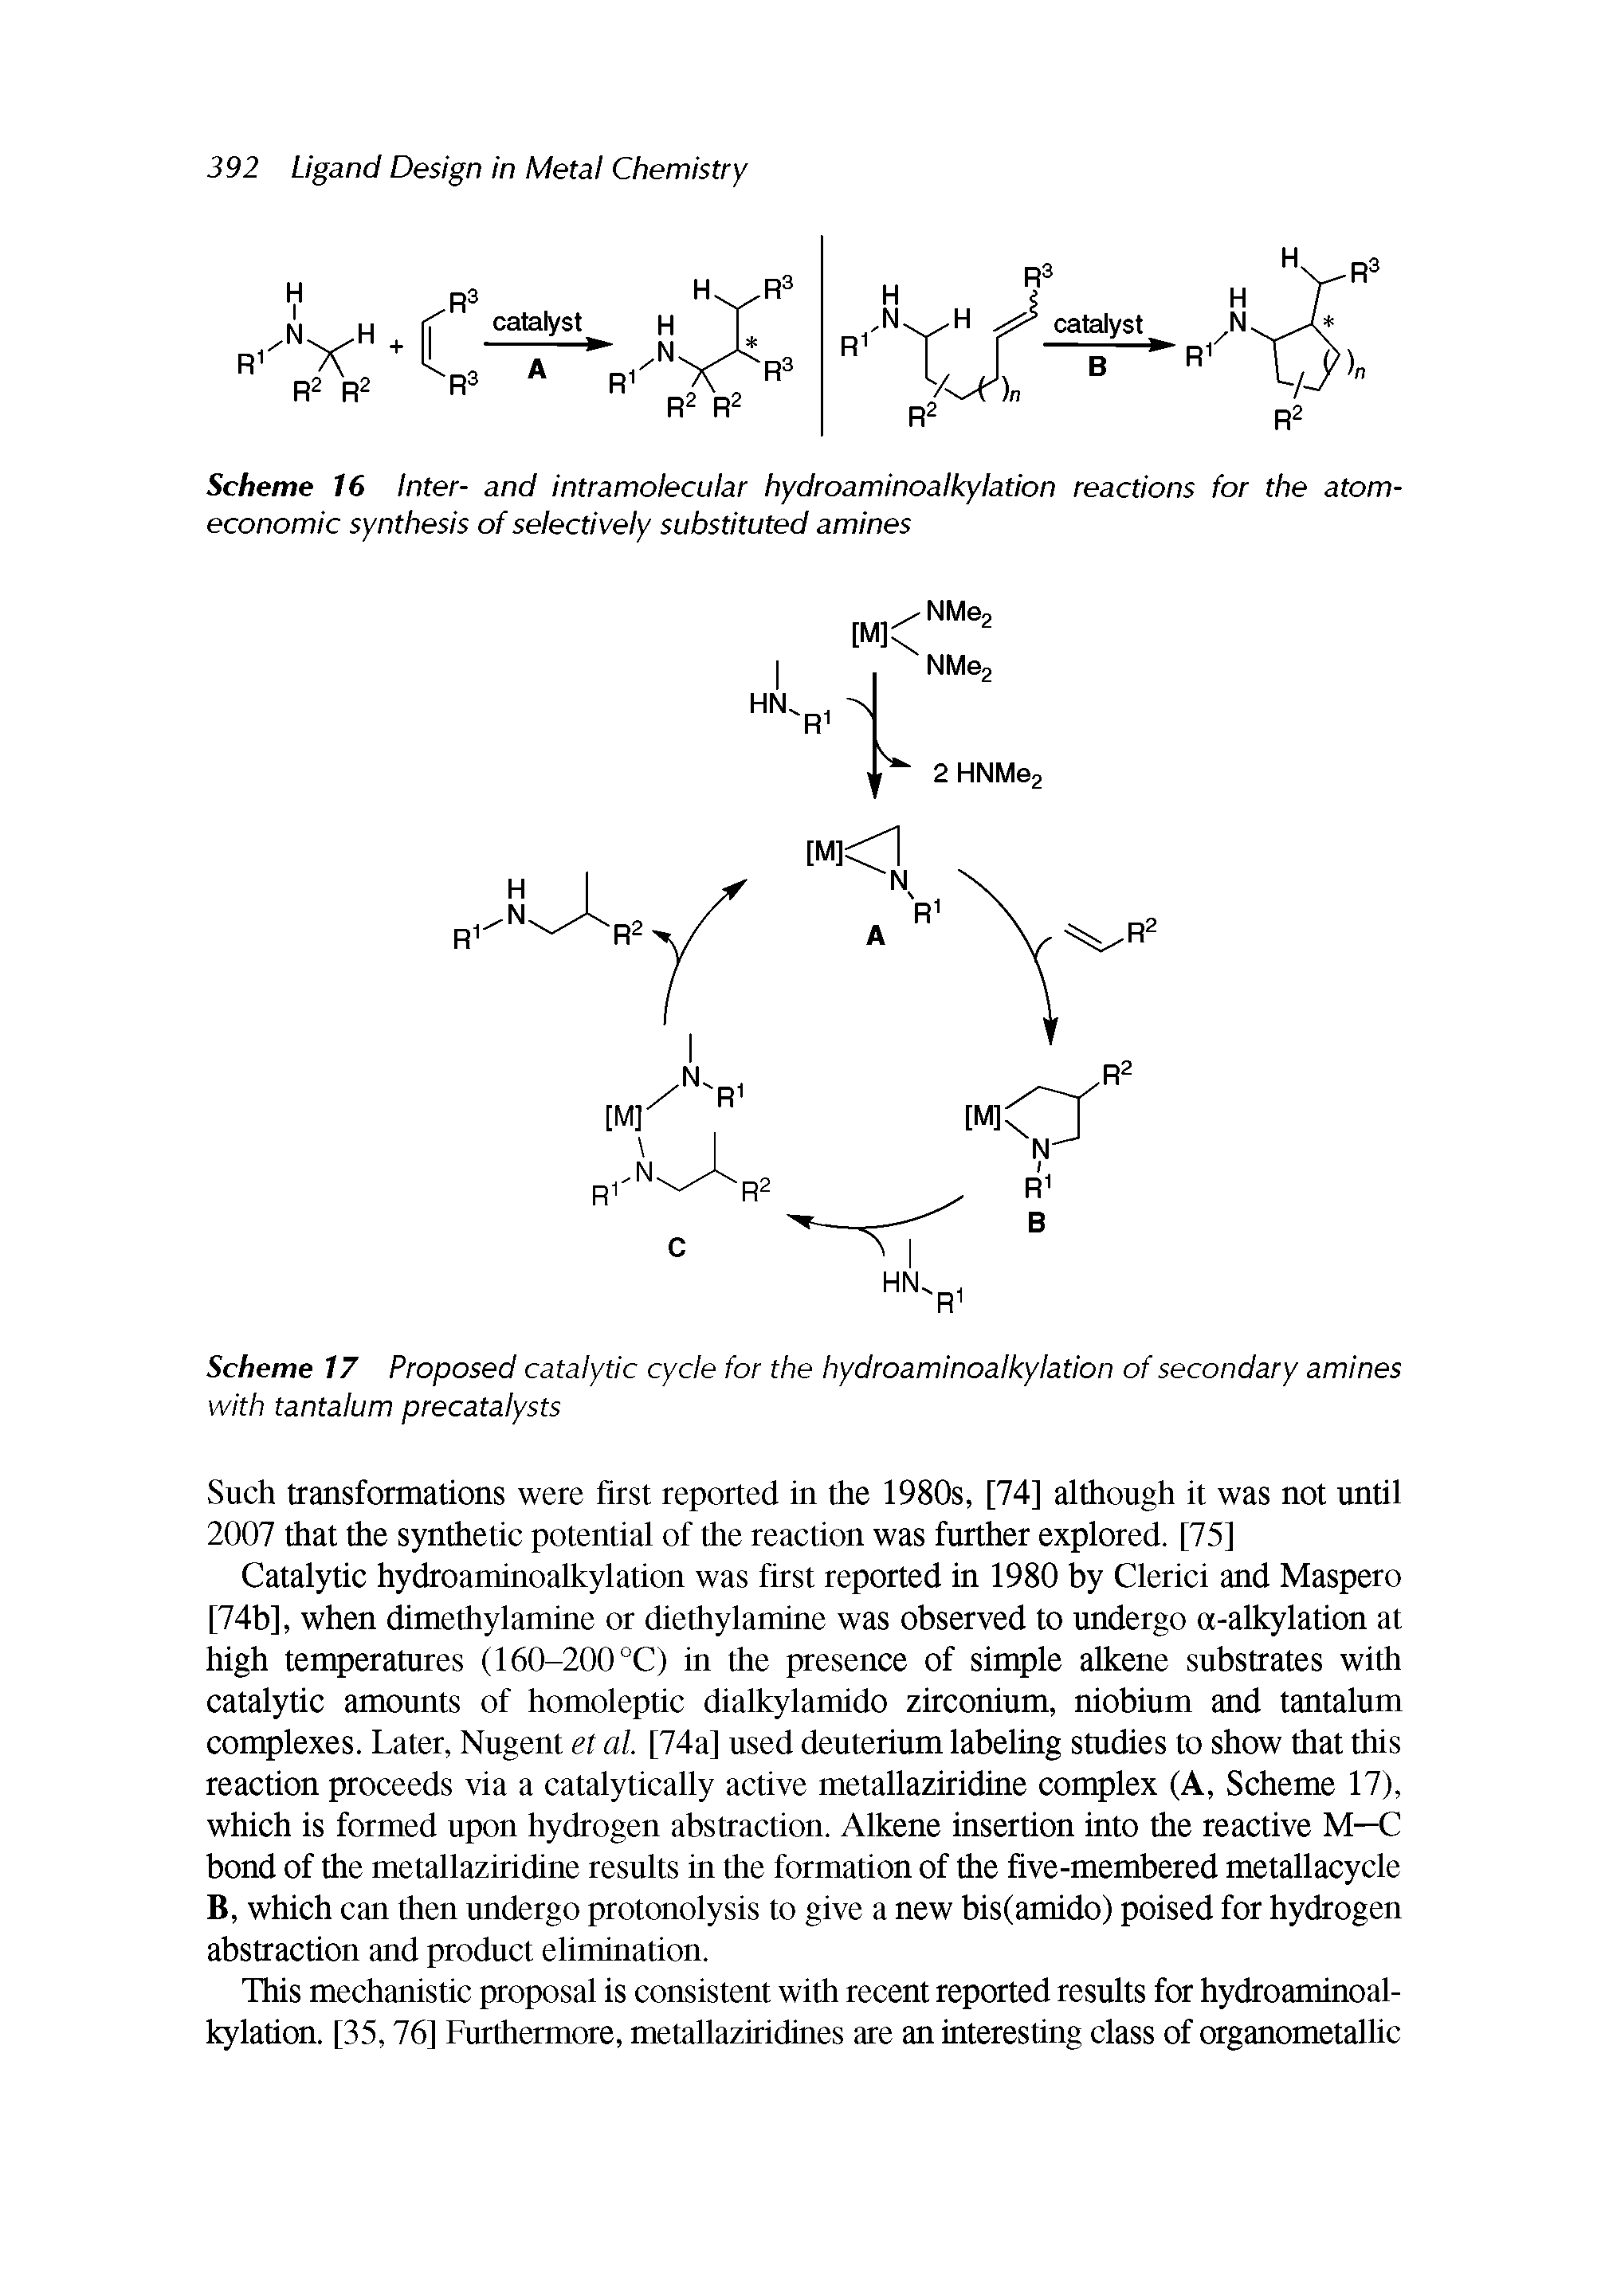 Scheme 17 Proposed catalytic cycle for the hydroaminoalkylation of secondary amines with tantalum precatalysts...